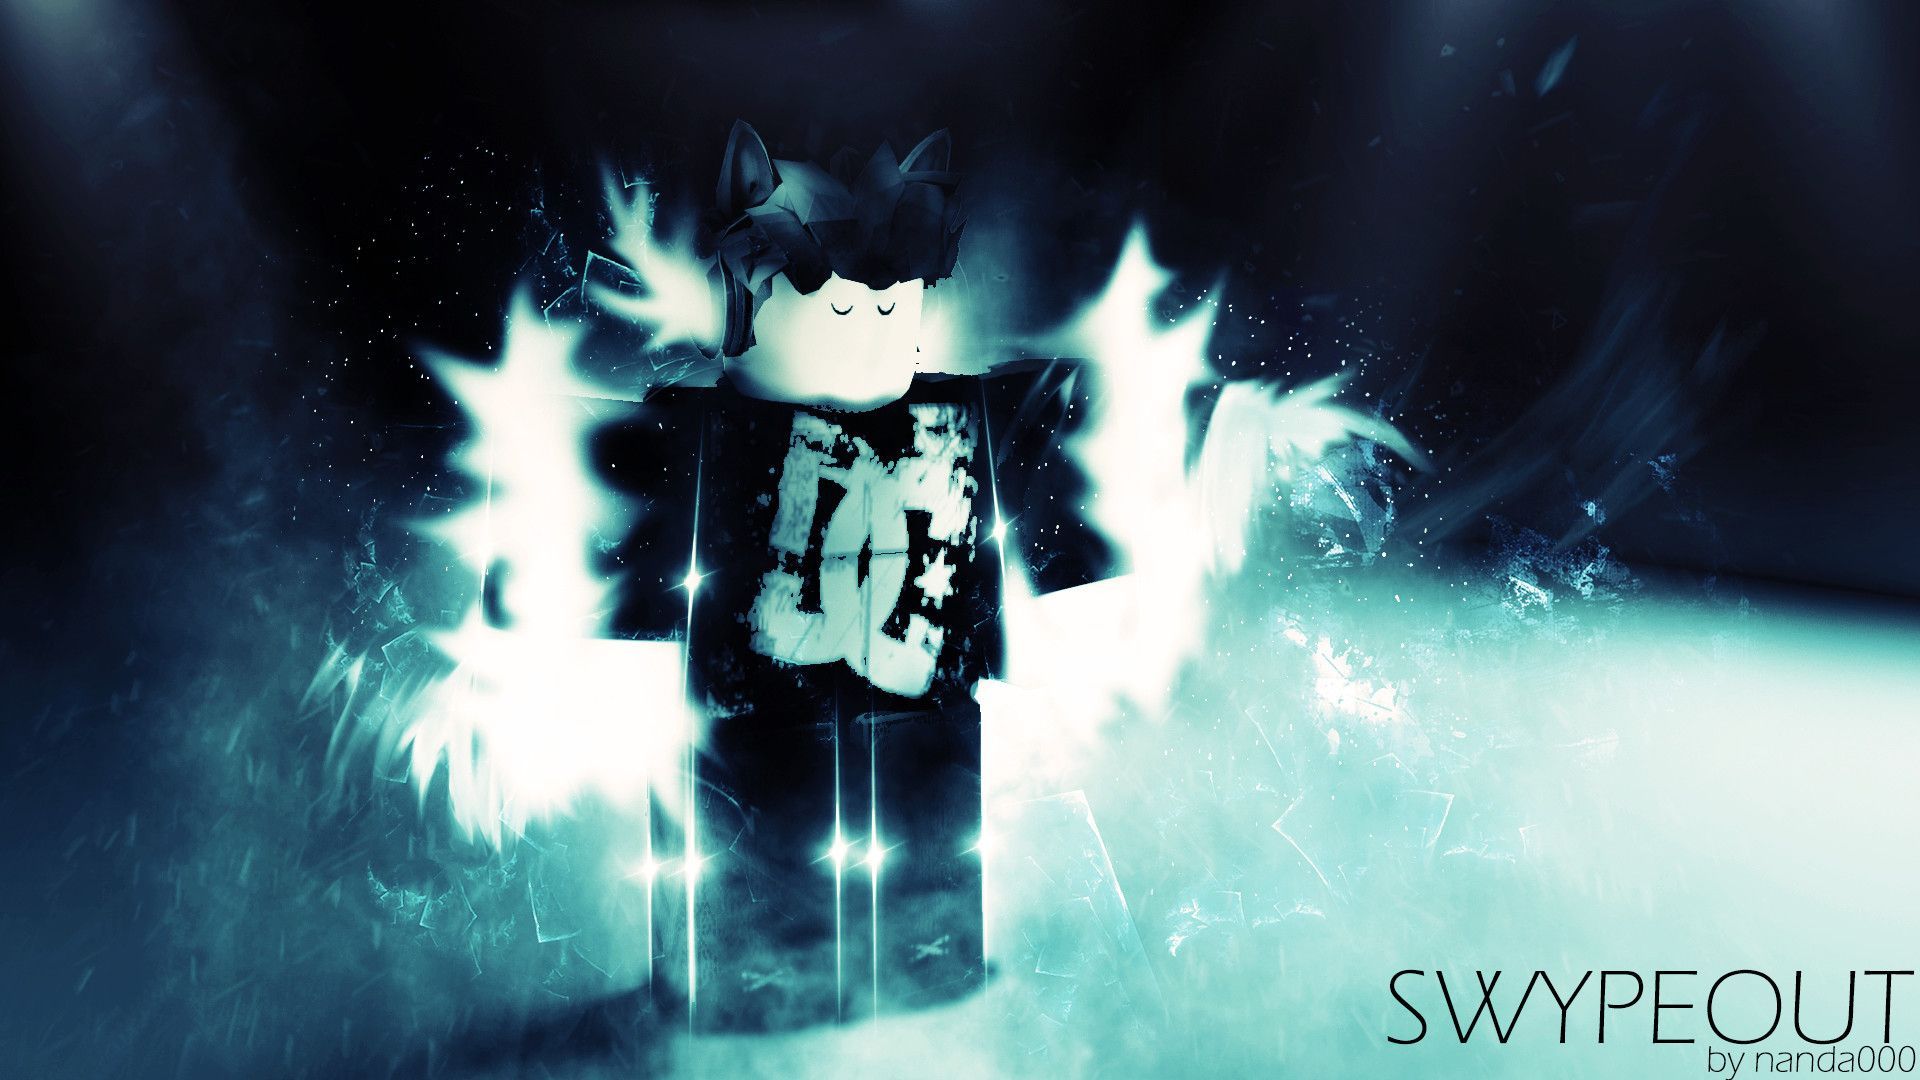 Cool Wallpapers Of Roblox